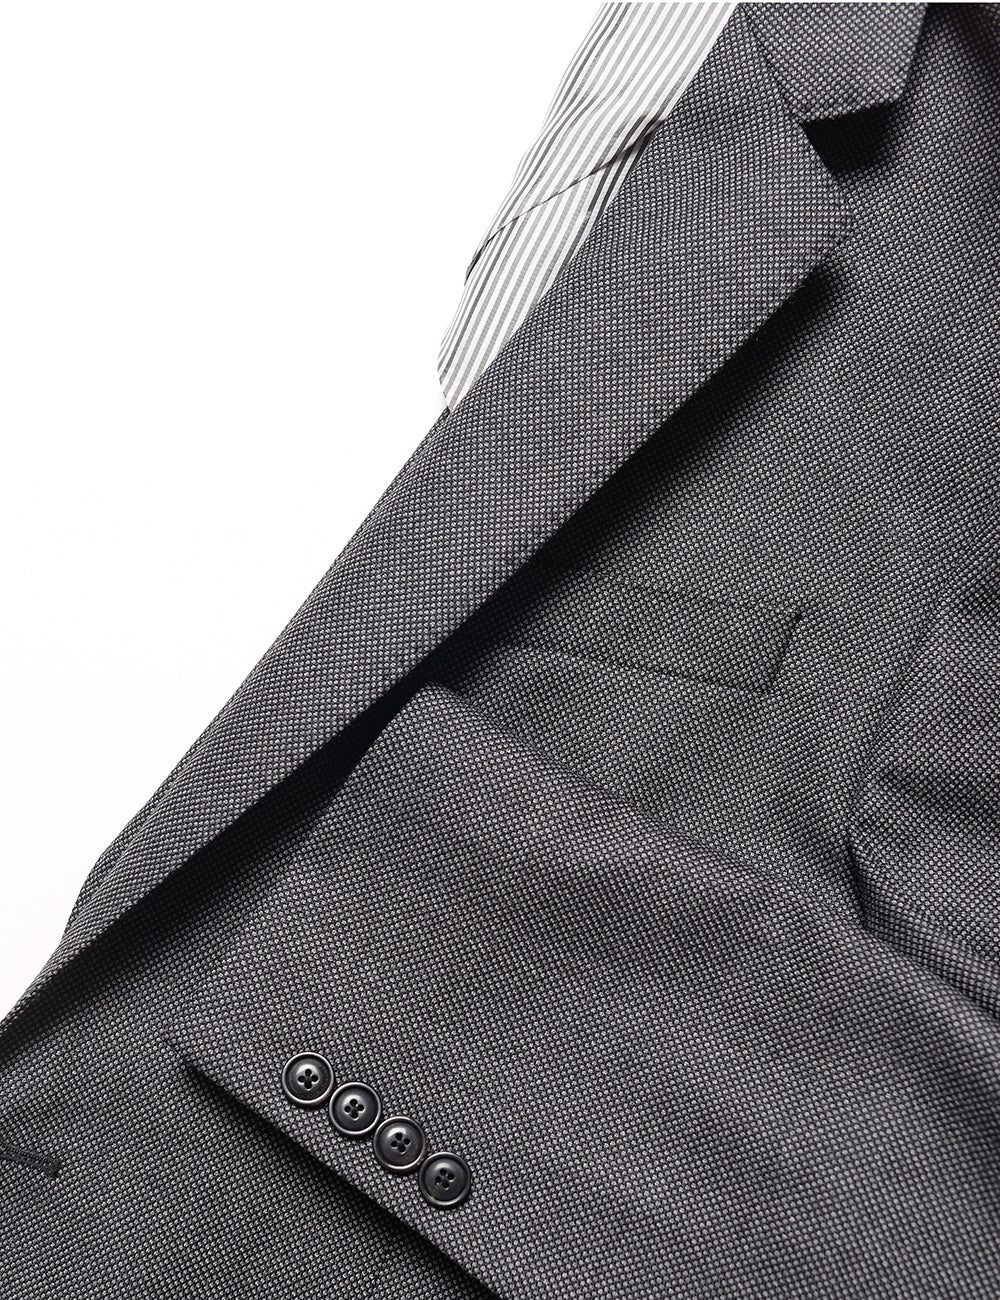 Detail shot of Brooklyn Tailors BKT50 Tailored Jacket in Birdseye Weave - Storm Gray showing lapel, lining, chest pocket, and cuff